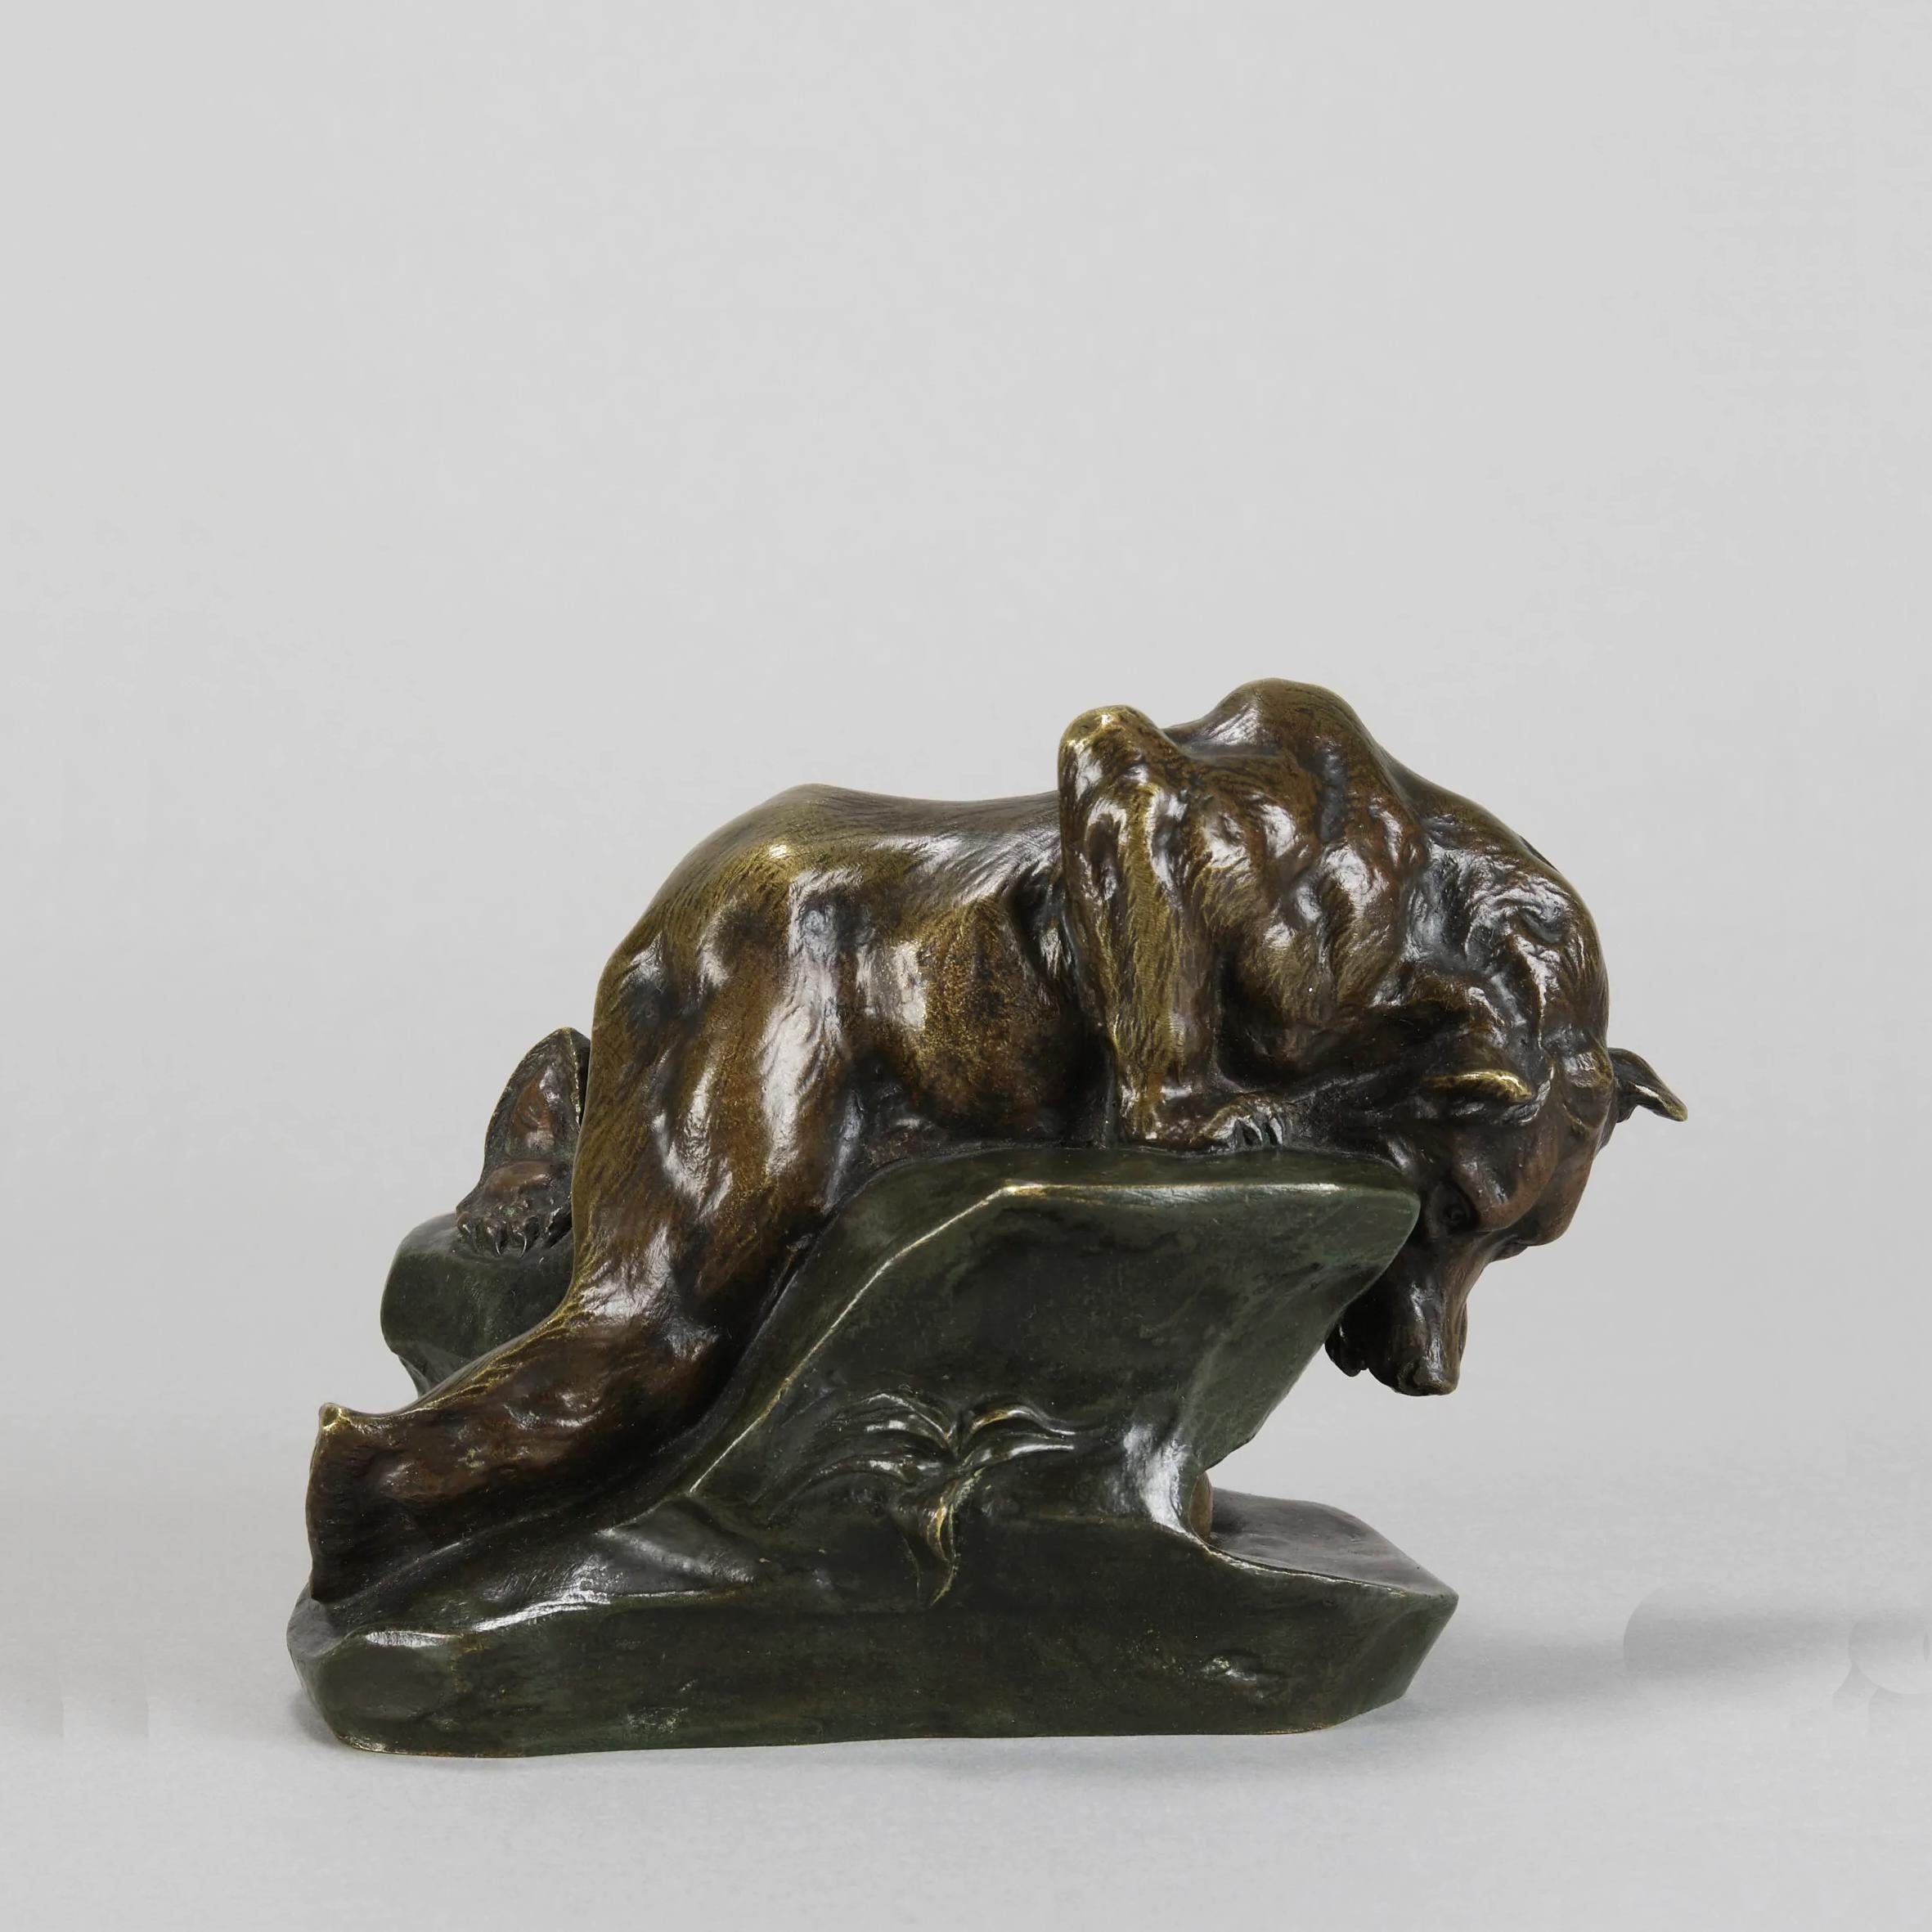 An amusing early 20th Century bronze group of a bear peering over the edge of a rock at a rabbit quietly hiding under a ledge, with excellent rich brown patina and fine hand chased surface detail. Signed Paillet

ADditional information
Measures: